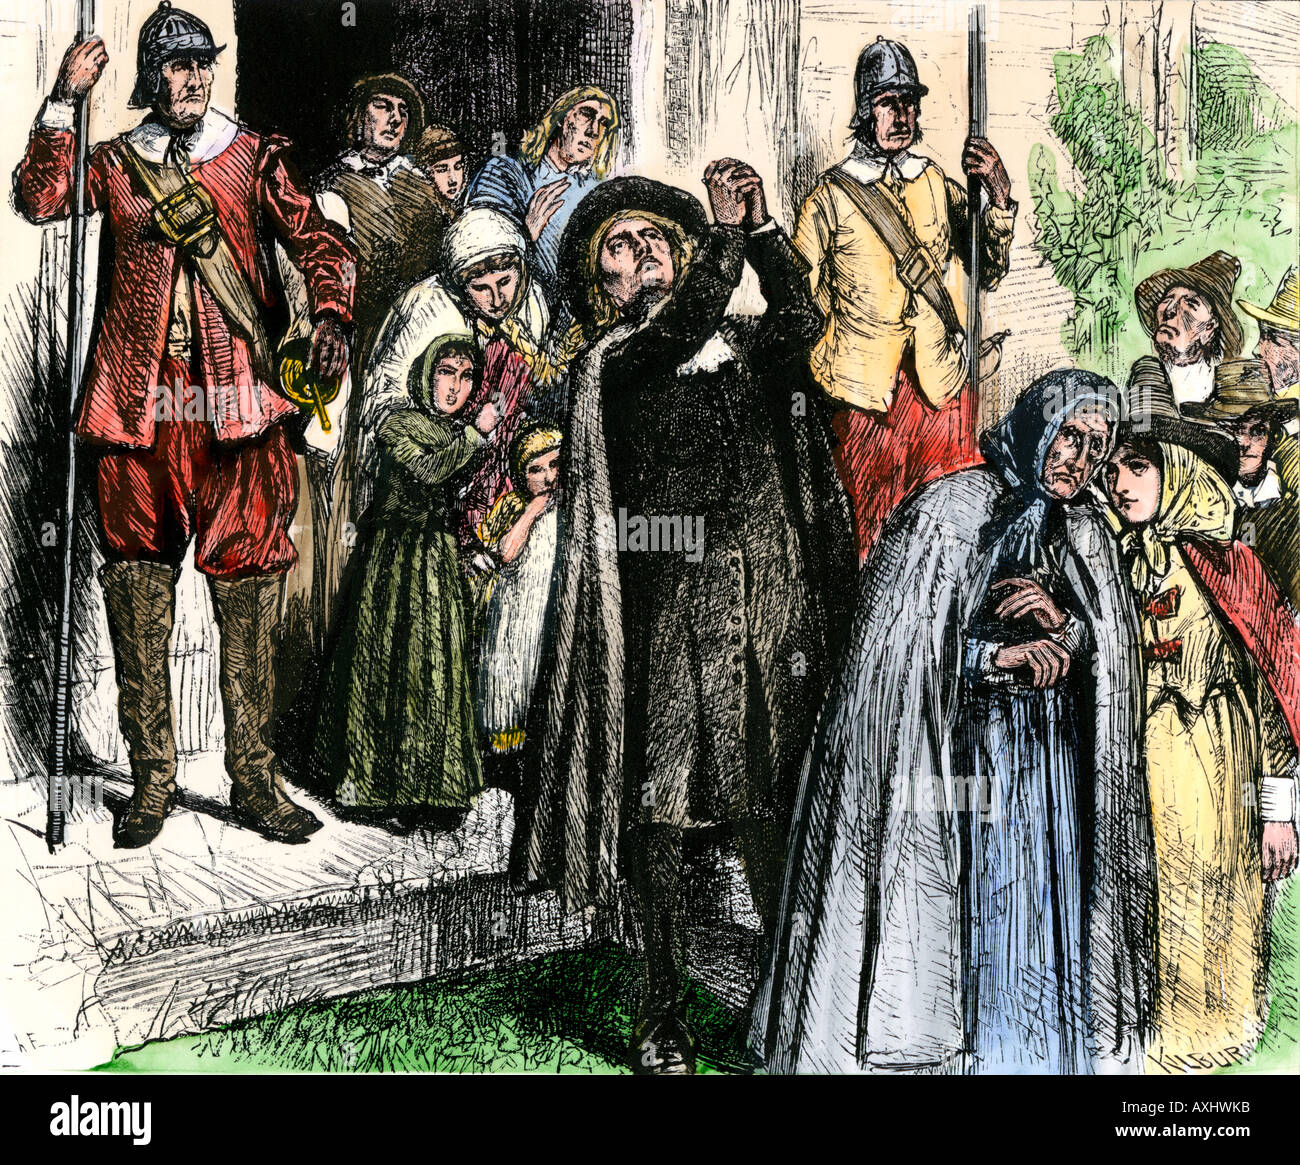 New England Puritan colonists leaving church 1600s. Hand-colored woodcut Stock Photo